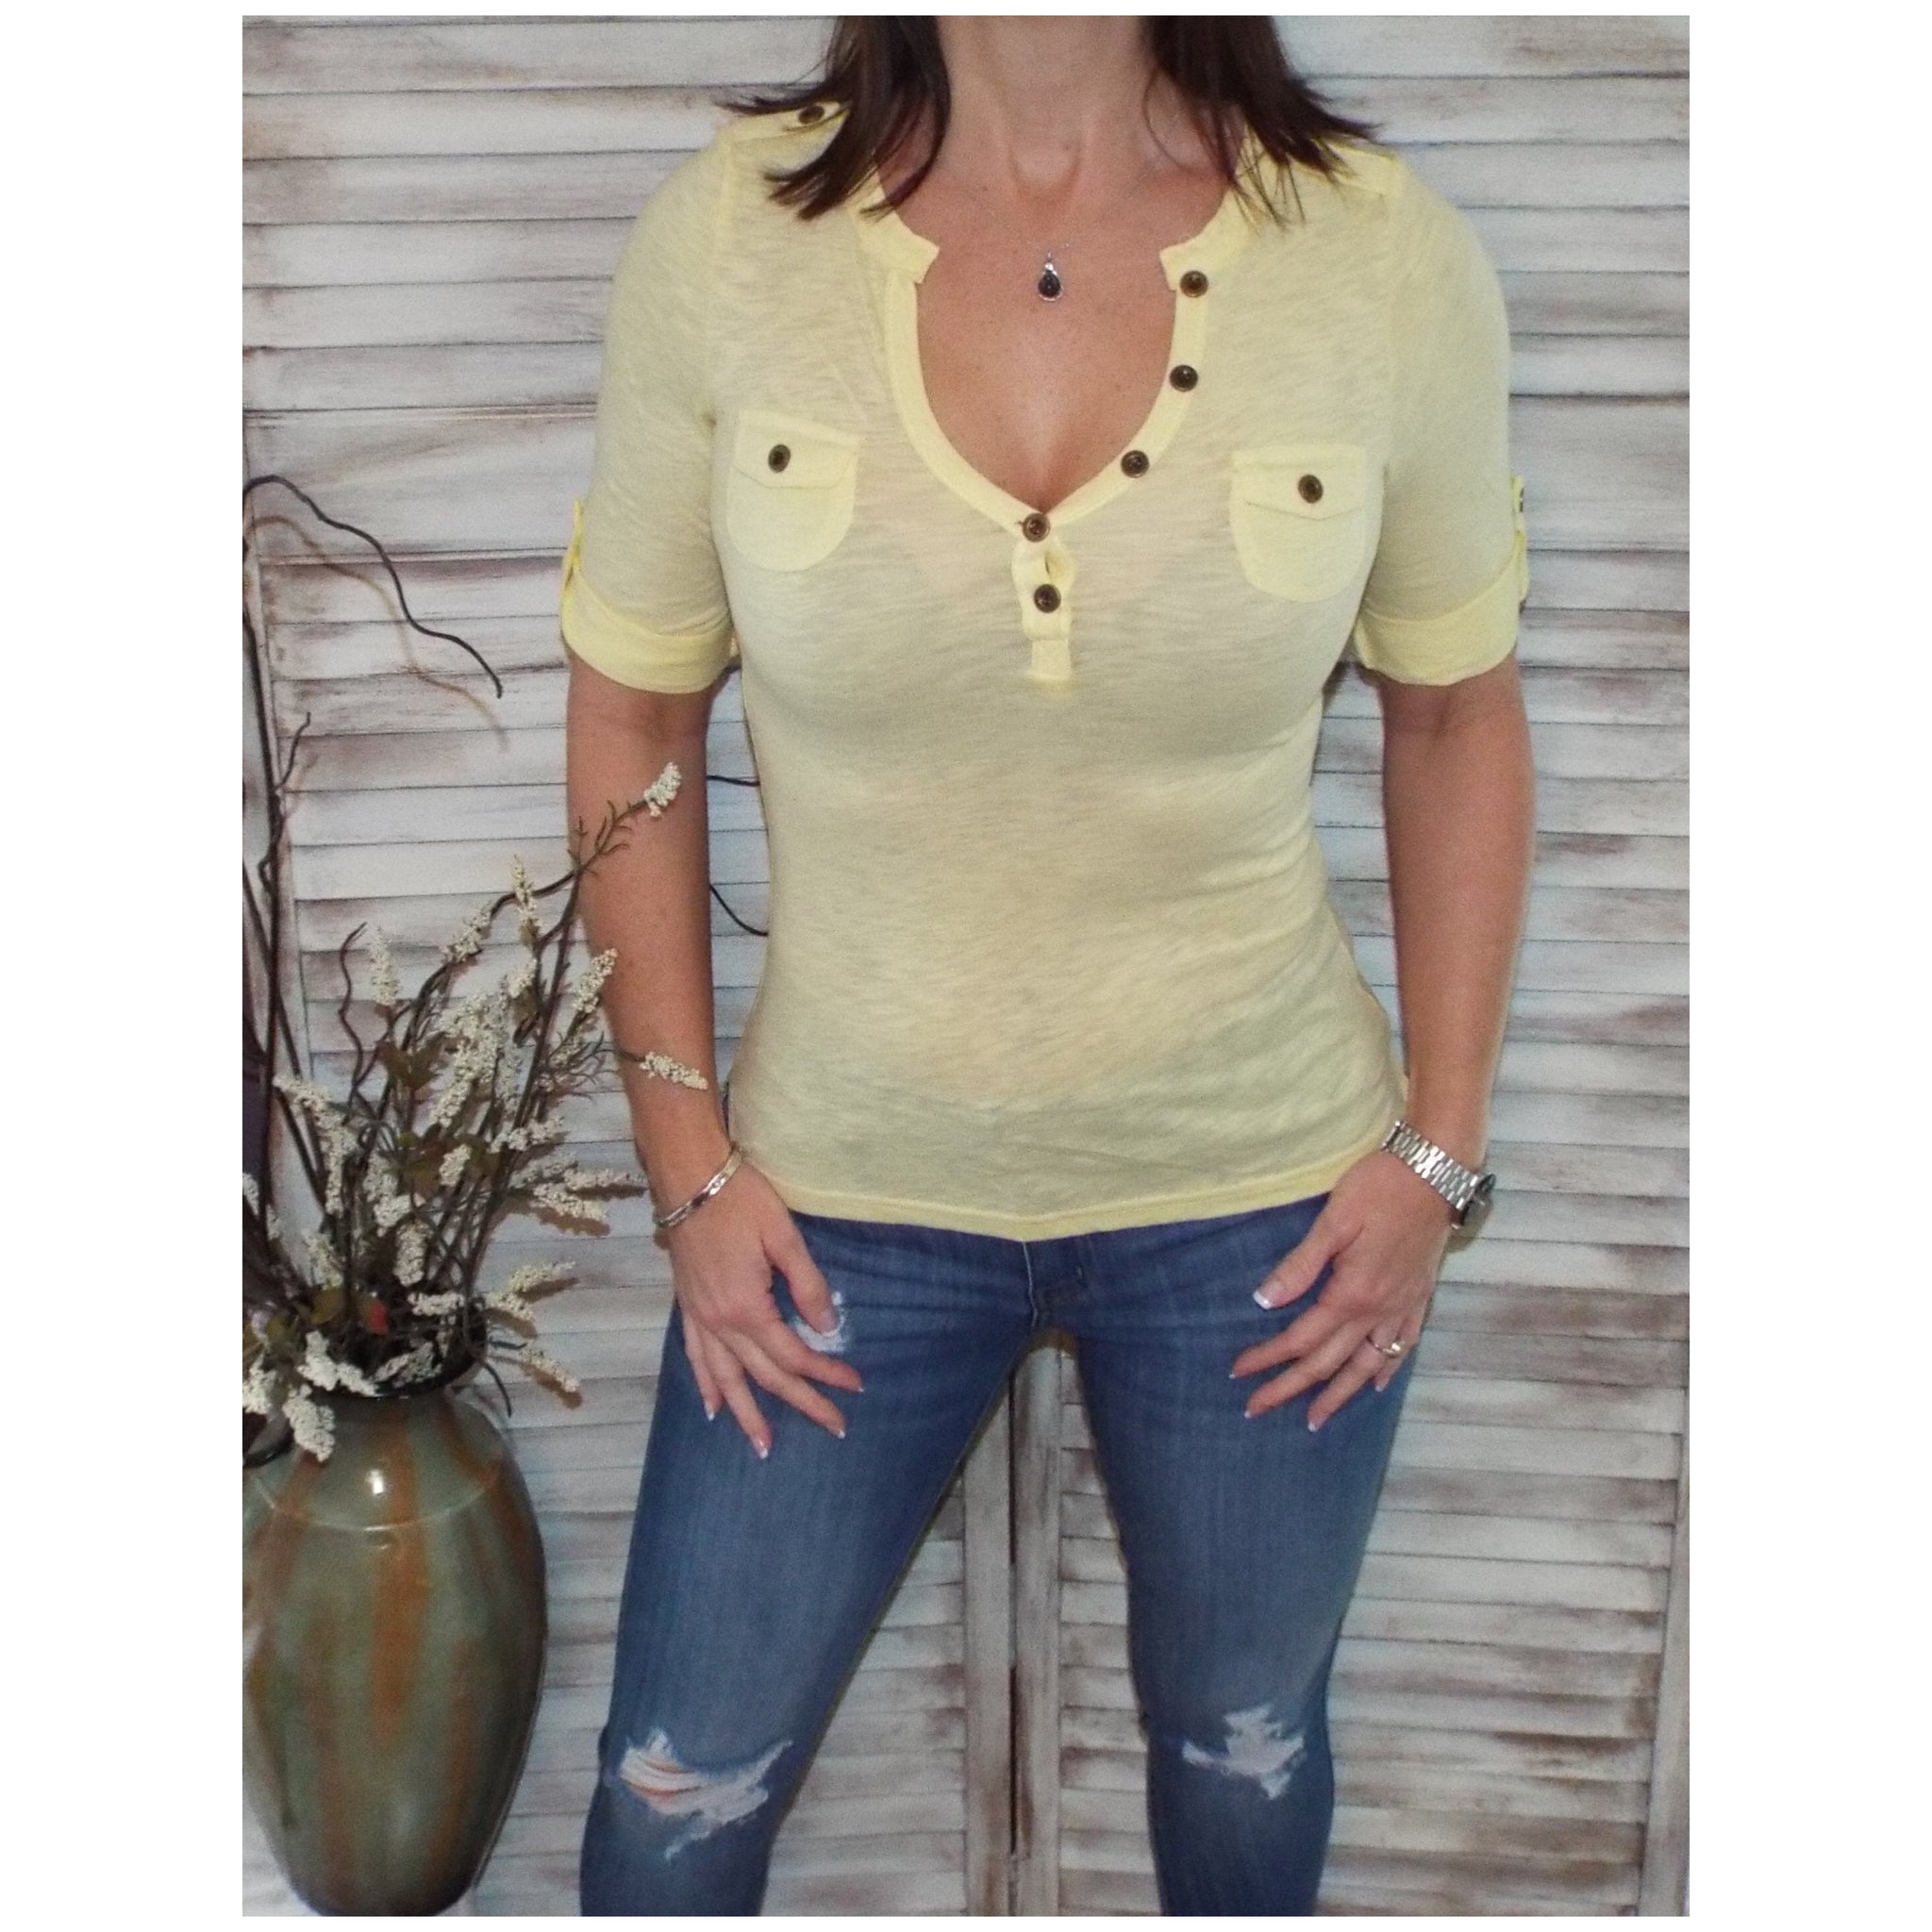 Sexy V Neck Plunge Cleavage Military Henley Pocket Cuff Sleeve Top Yellow S/M/L